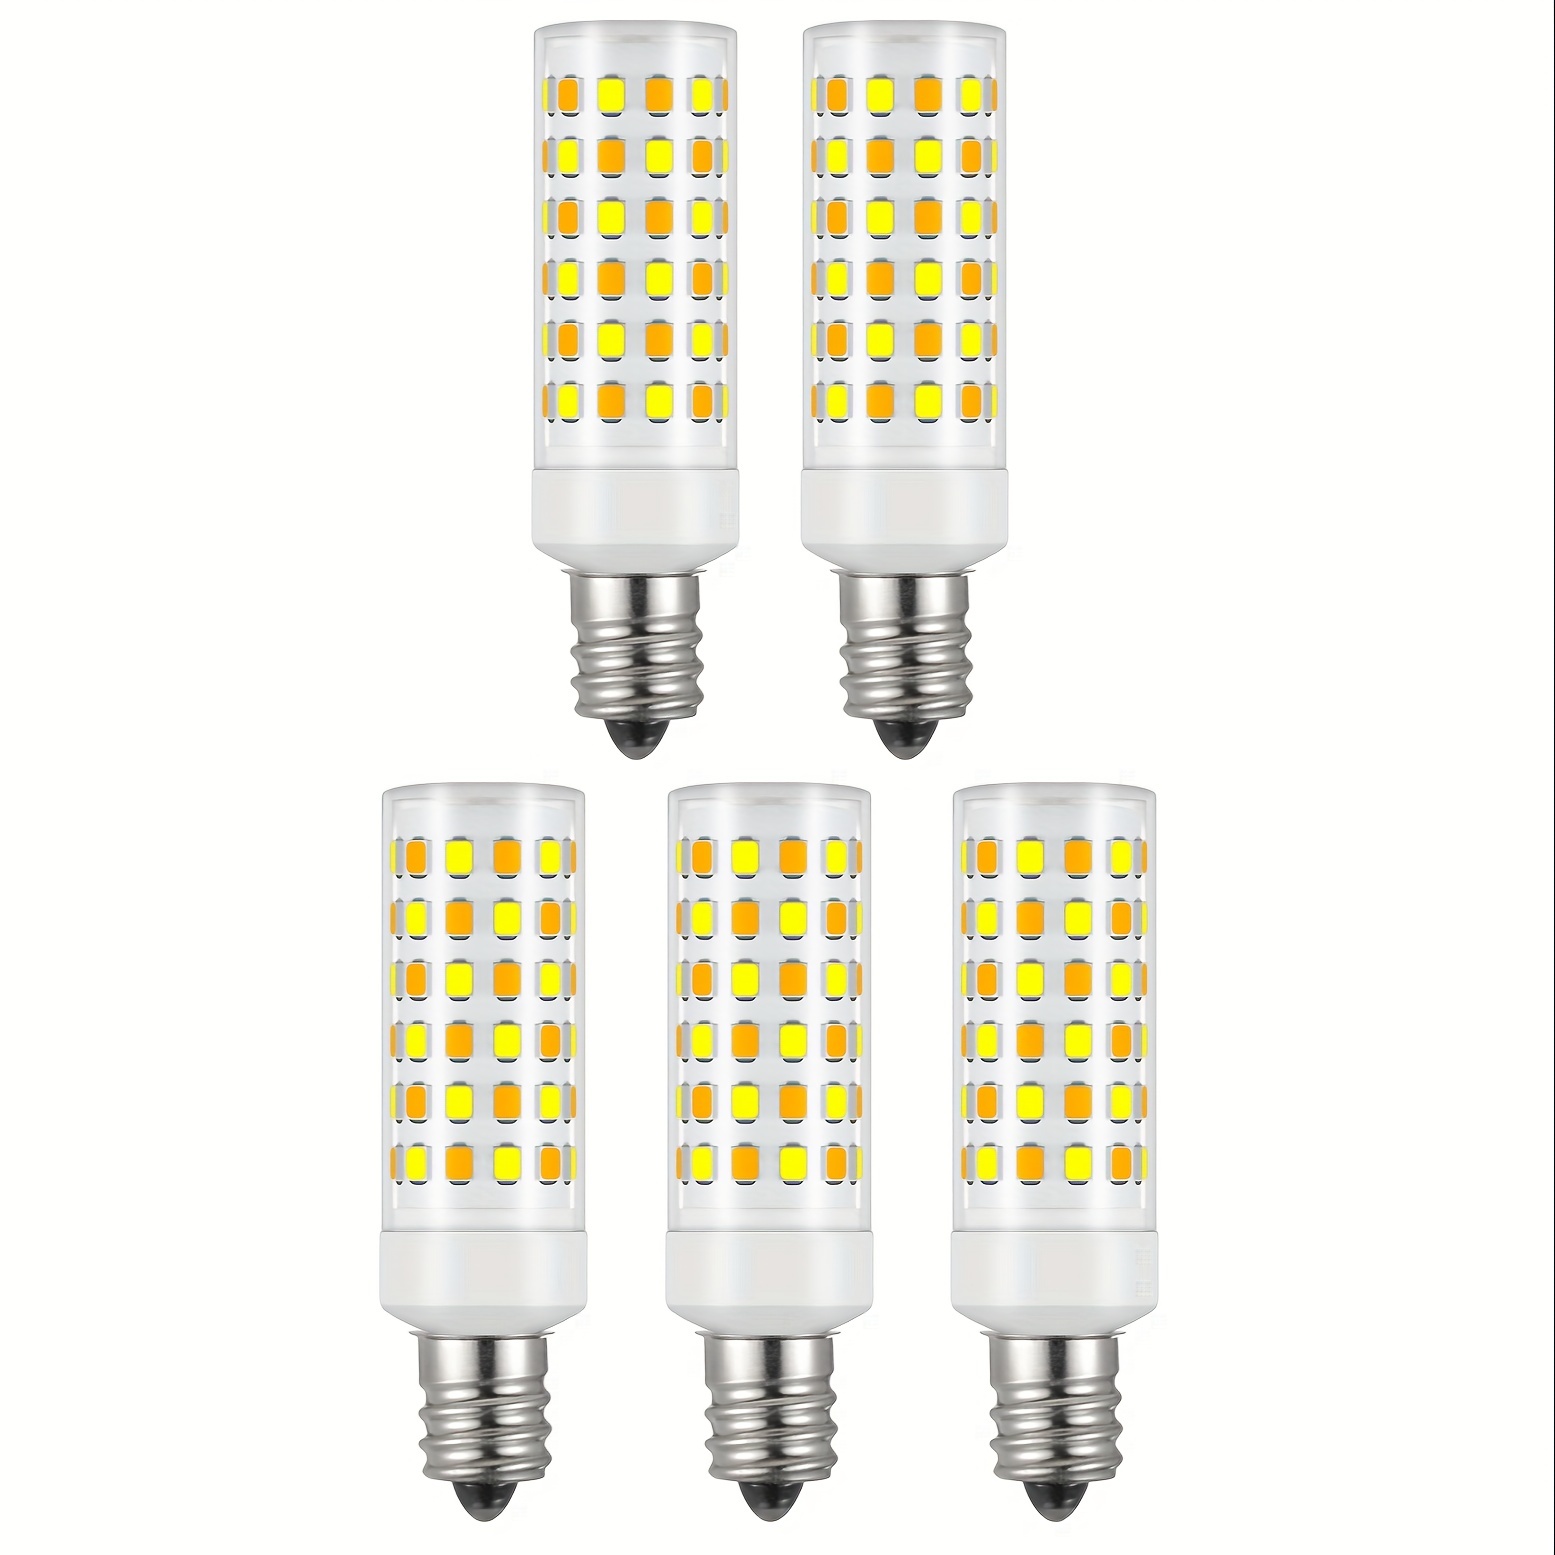 Ampoules Bougie LED 9W 7W 5W 3W 2W 1W LED 3 Couleurs Dimmable